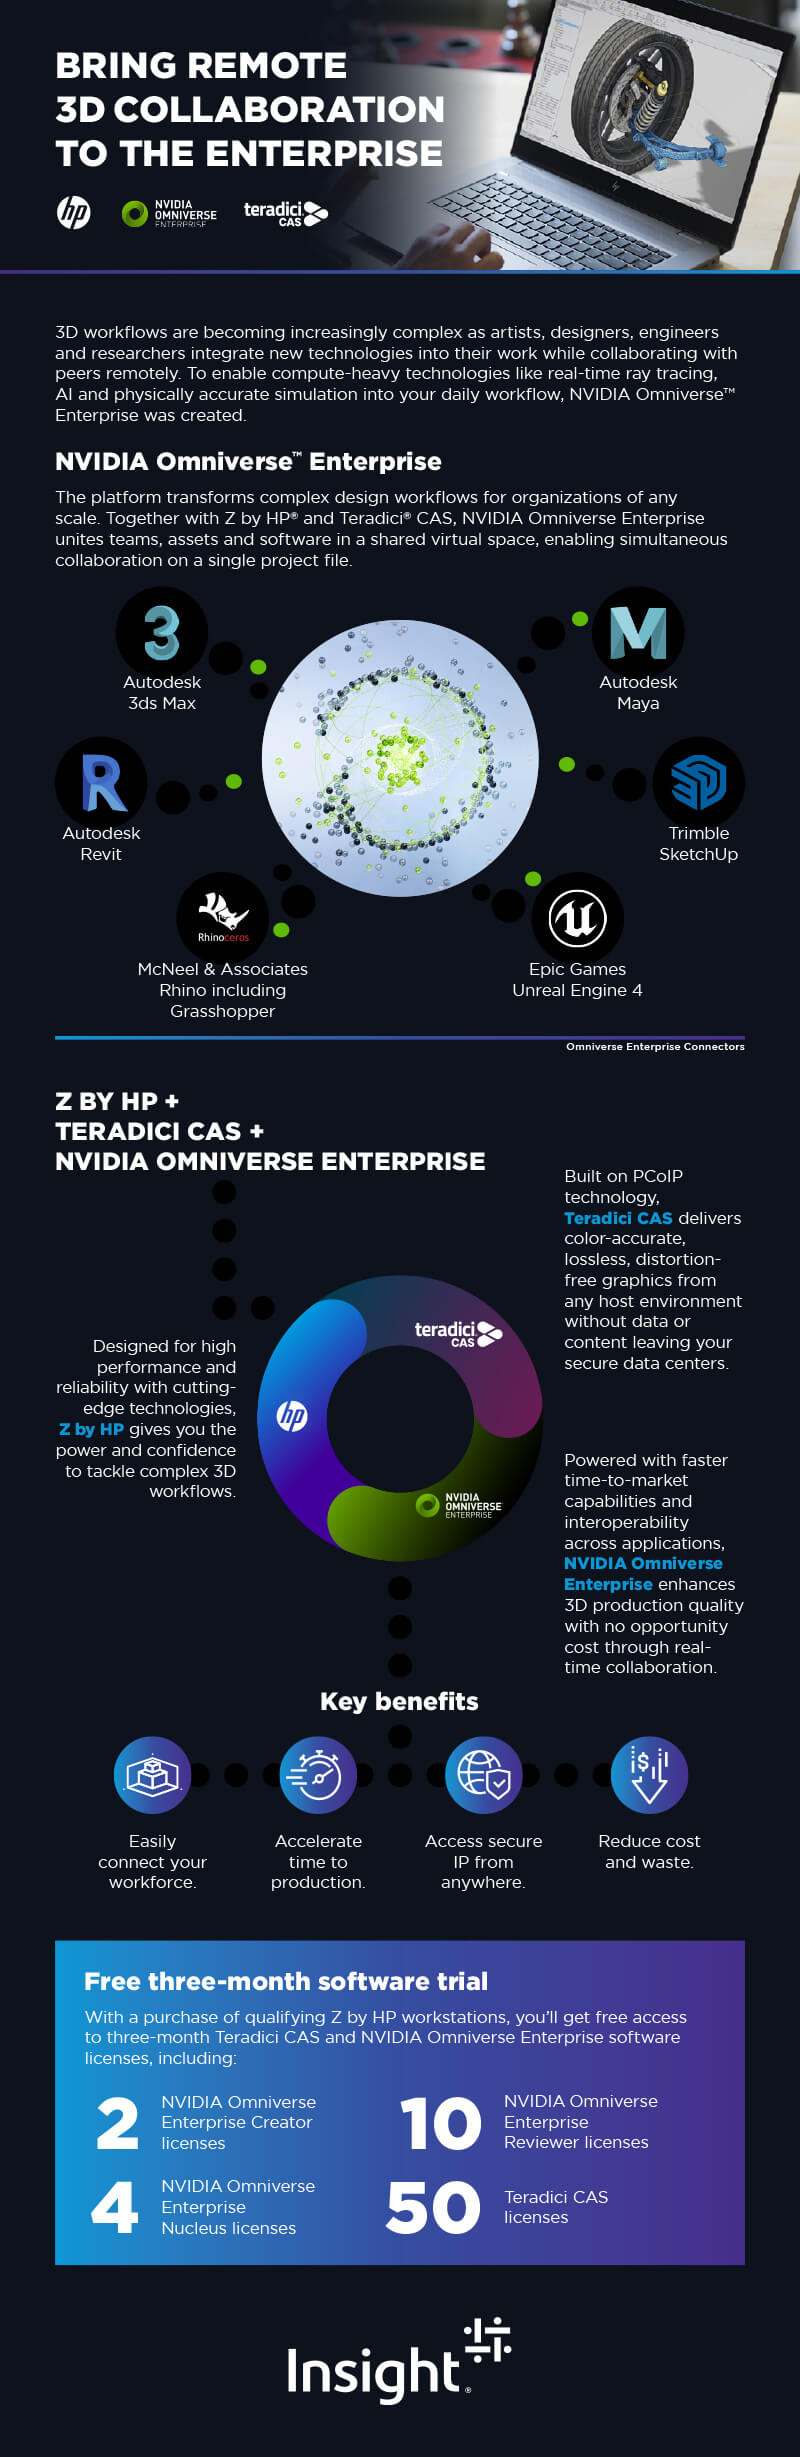 Employee Experience Tracking: The Key to Workforce Retention infographic. as translated below Employee experience tracking, Employee experience app, Microsoft Viva, Work-life balance, Employee wellbeing, Workforce trends